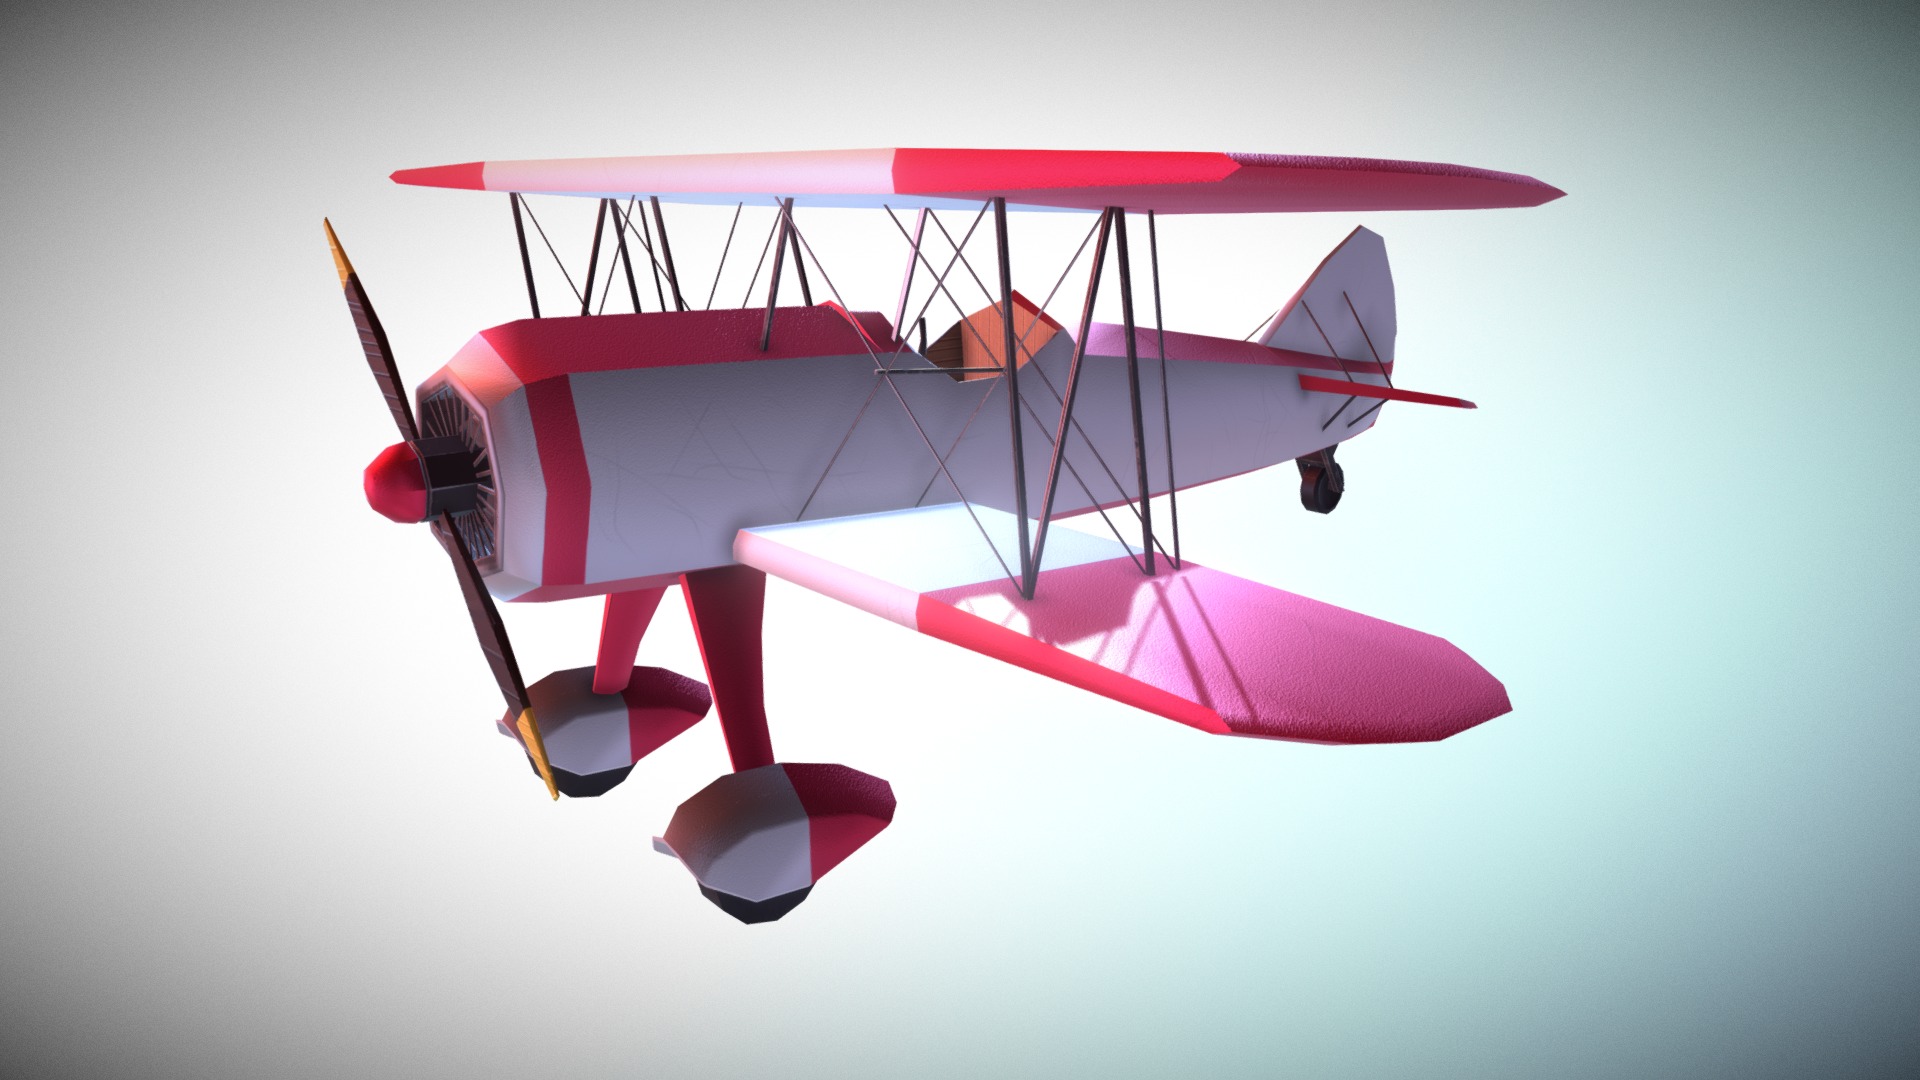 3D model Game Ready Aeroplane Red Low Poly - This is a 3D model of the Game Ready Aeroplane Red Low Poly. The 3D model is about a red and white airplane.